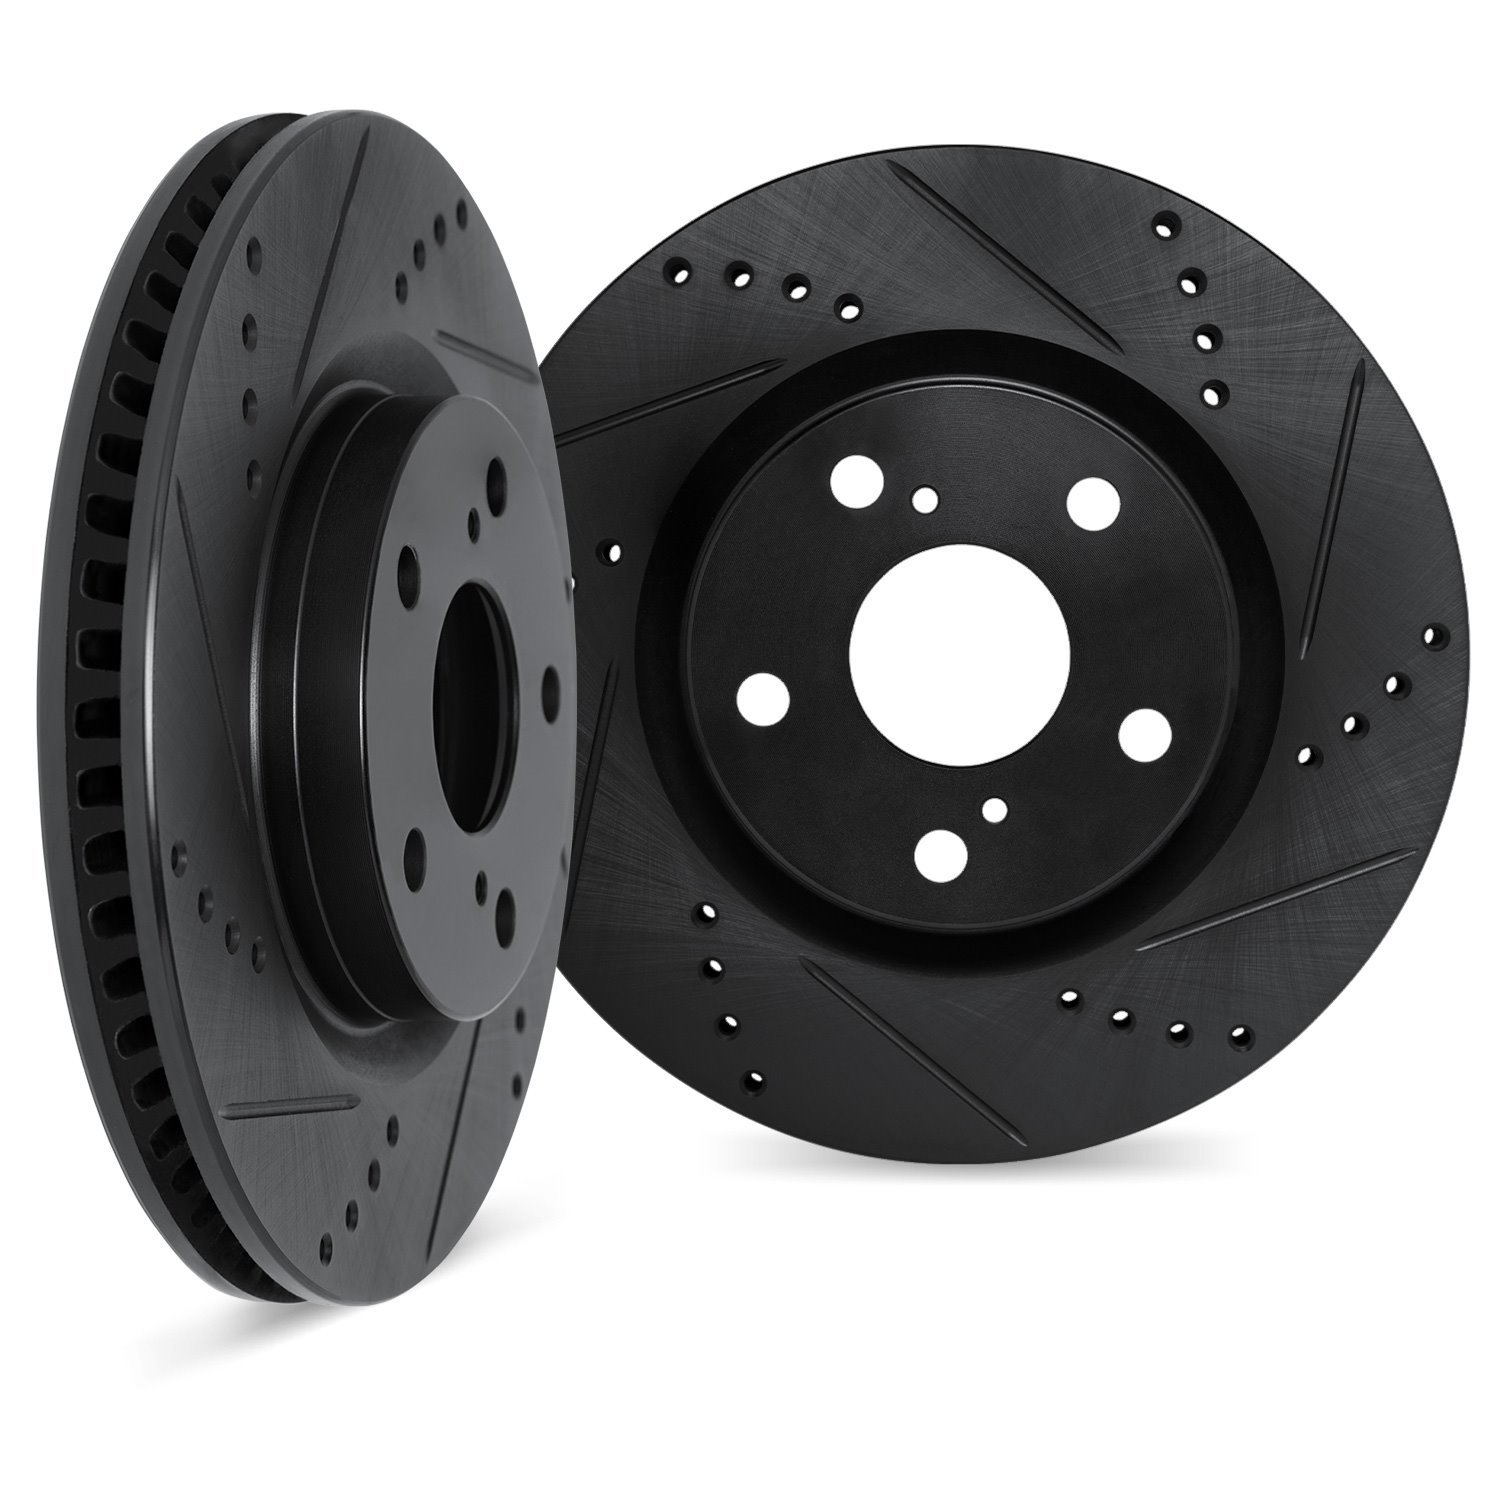 8002-75035 Drilled/Slotted Brake Rotors [Black], Fits Select Lexus/Toyota/Scion, Position: Rear